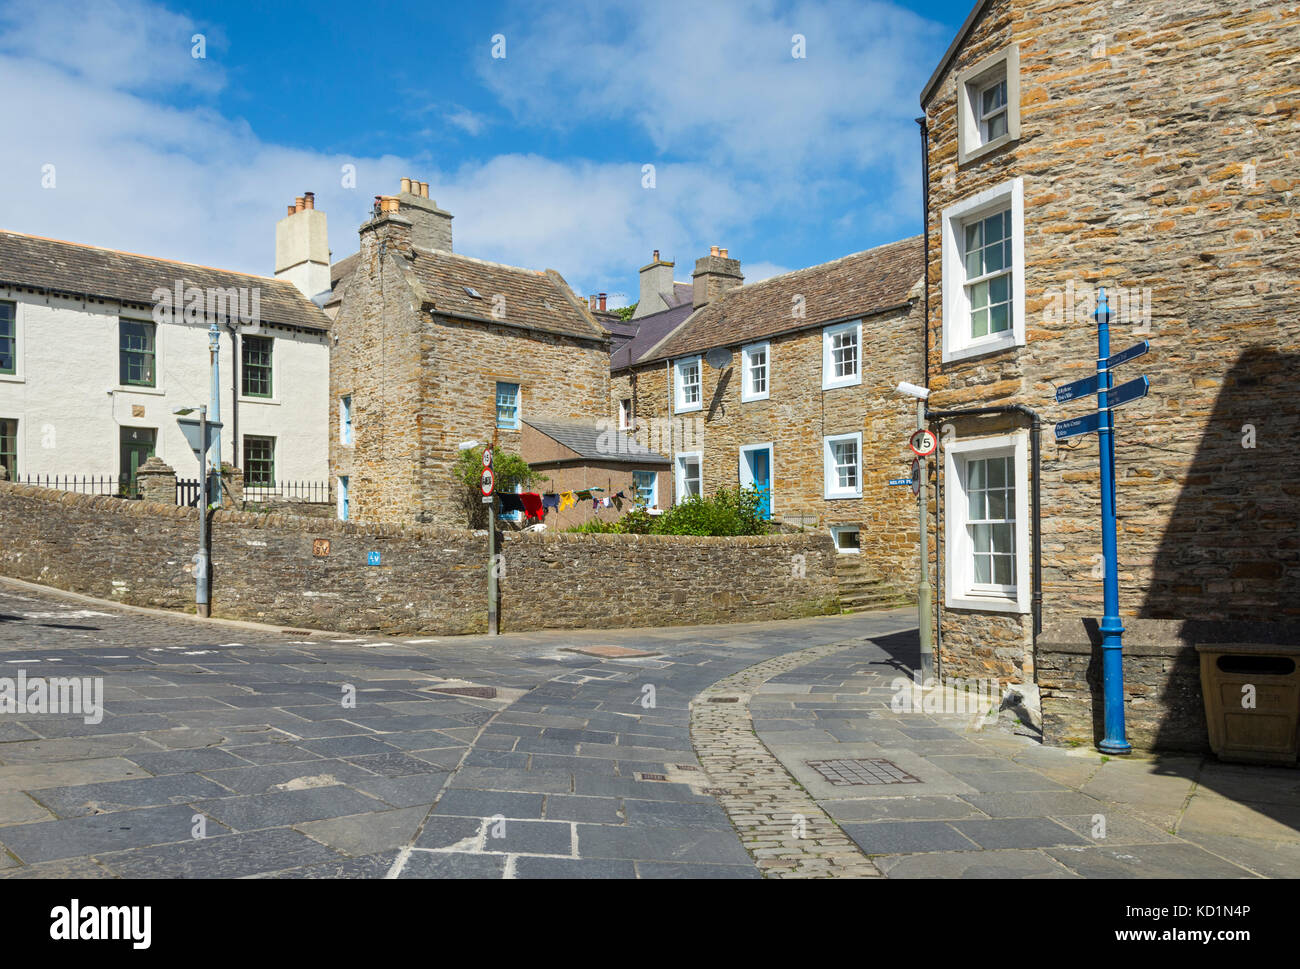 At the junction of Albert Street and Dundas Street, Stromness, Orkney Mainland, Scotland, UK. Stock Photo